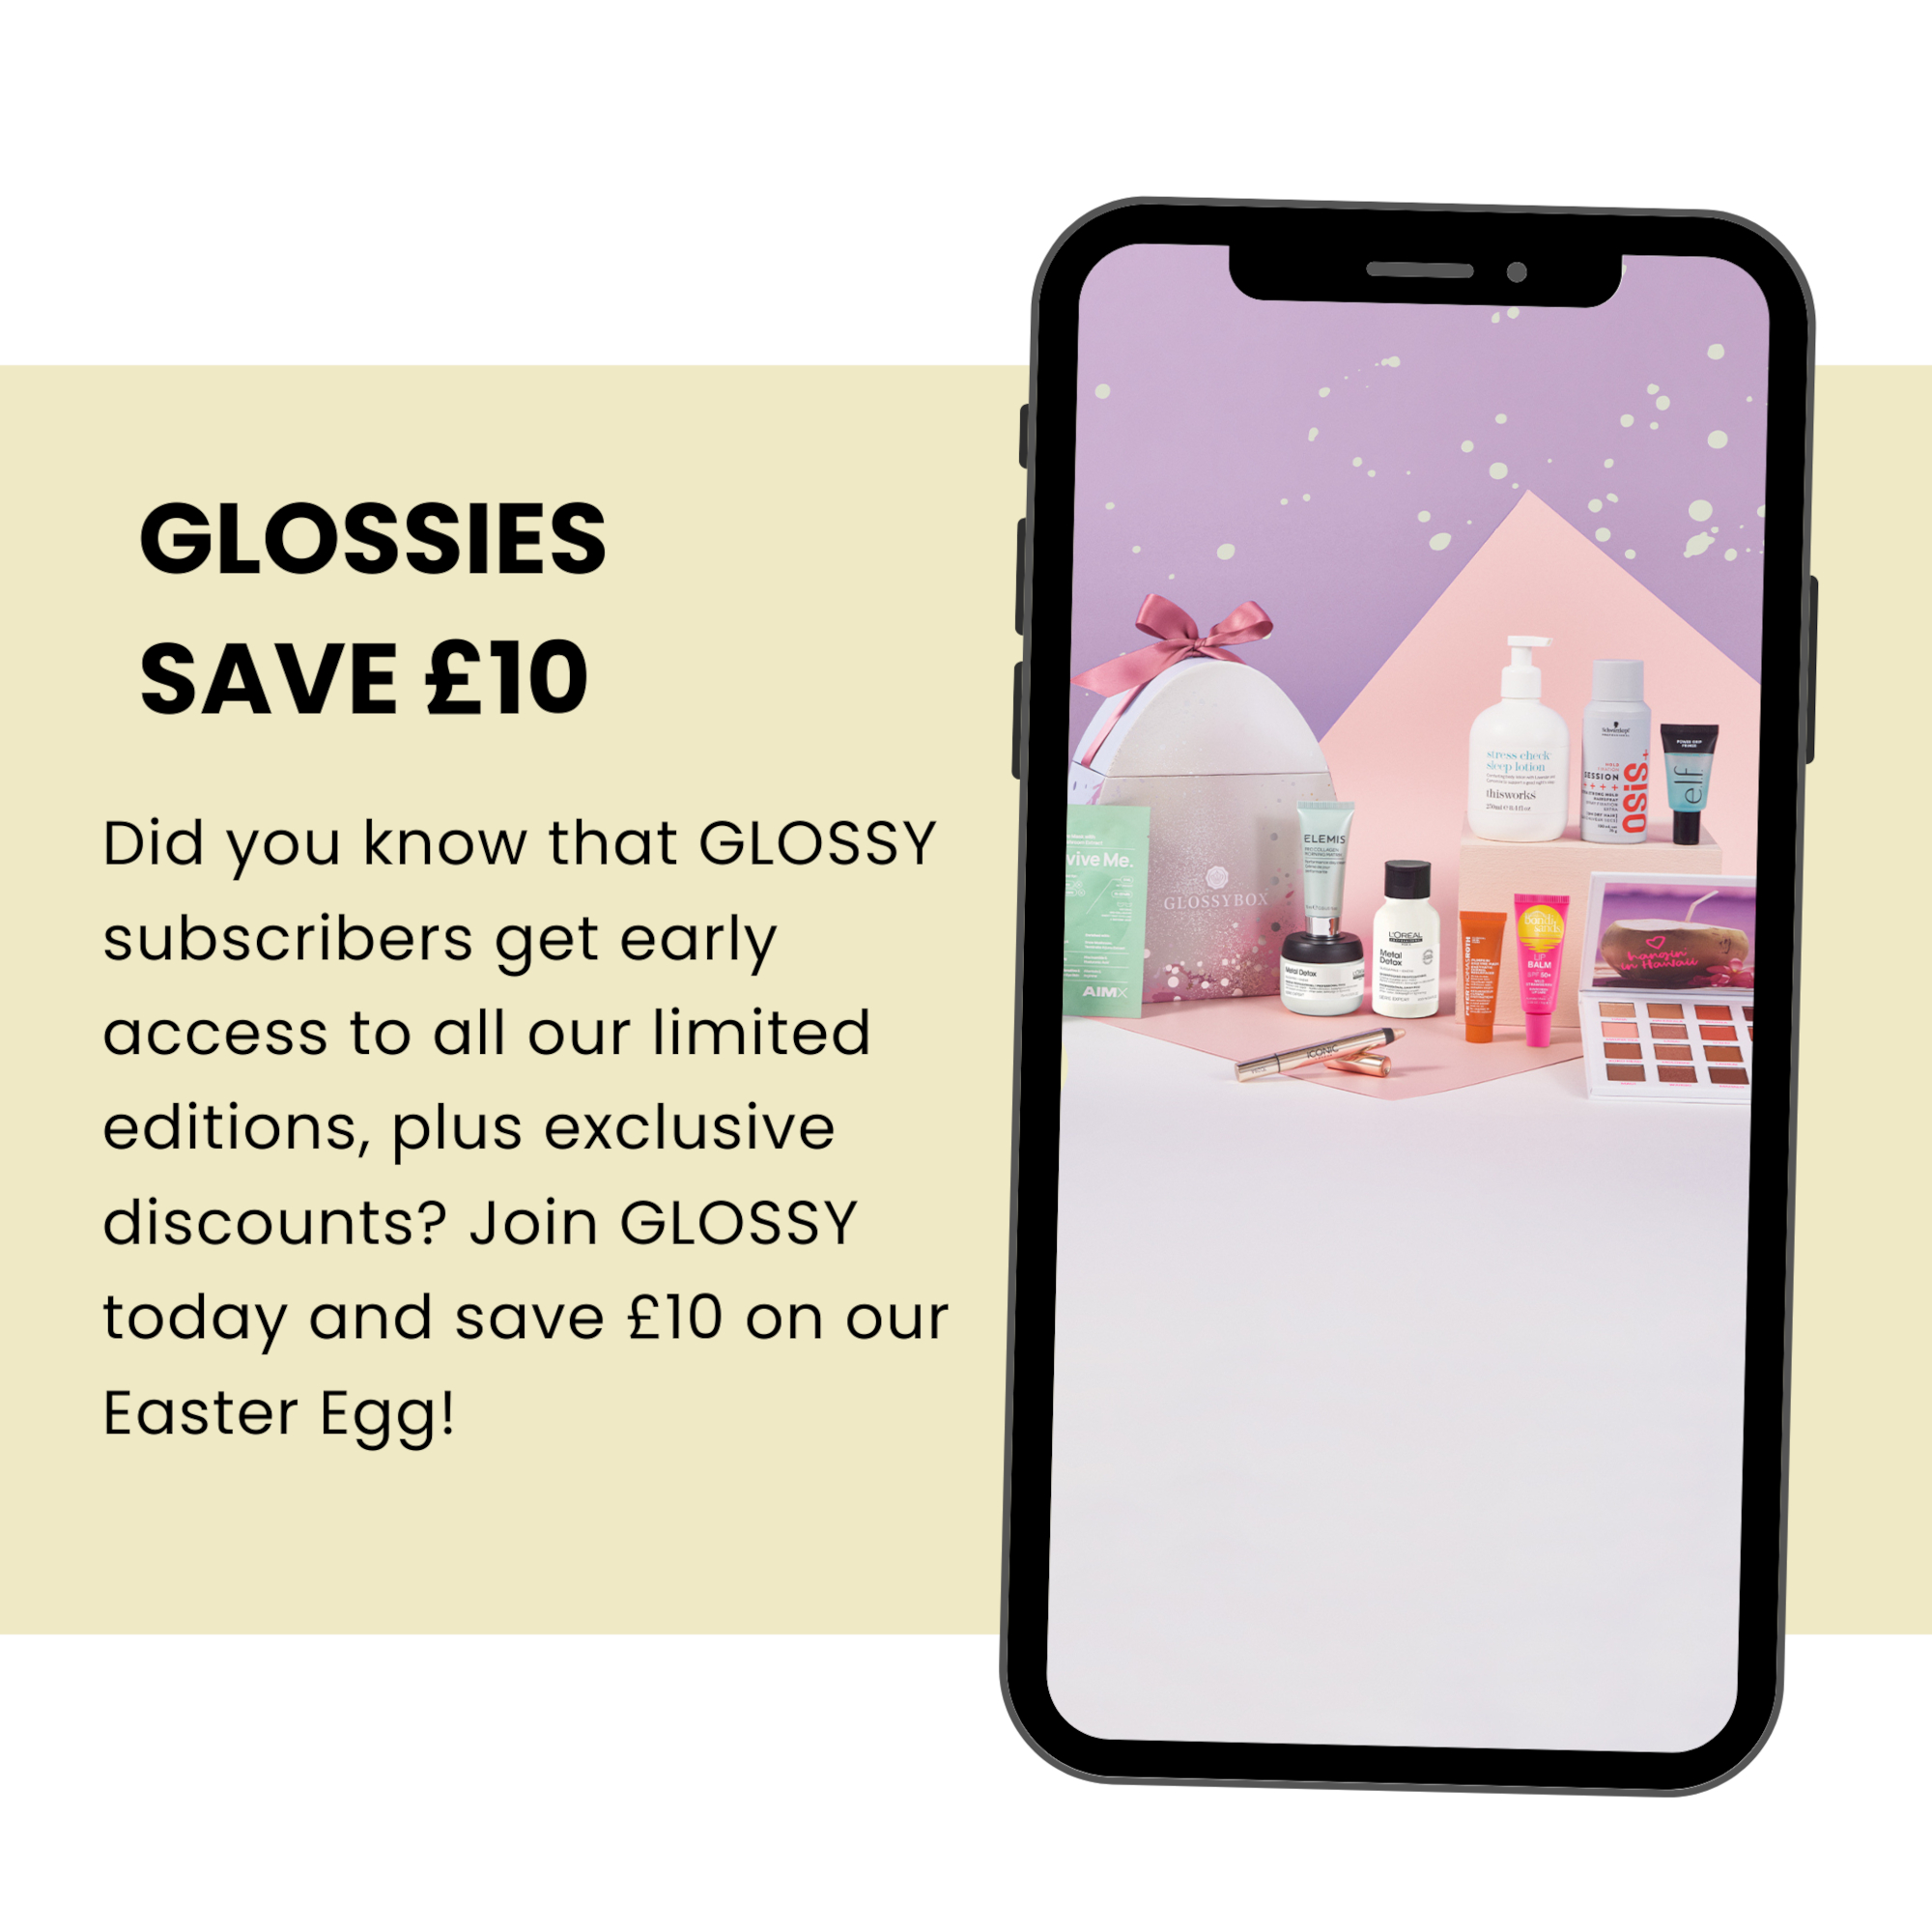 Glossies save 10 pounds, did you know that glossy subscribers get early access to all our limited editions, plus exclusive discounts, join glossy today and save 10 pounds on our easter eggg